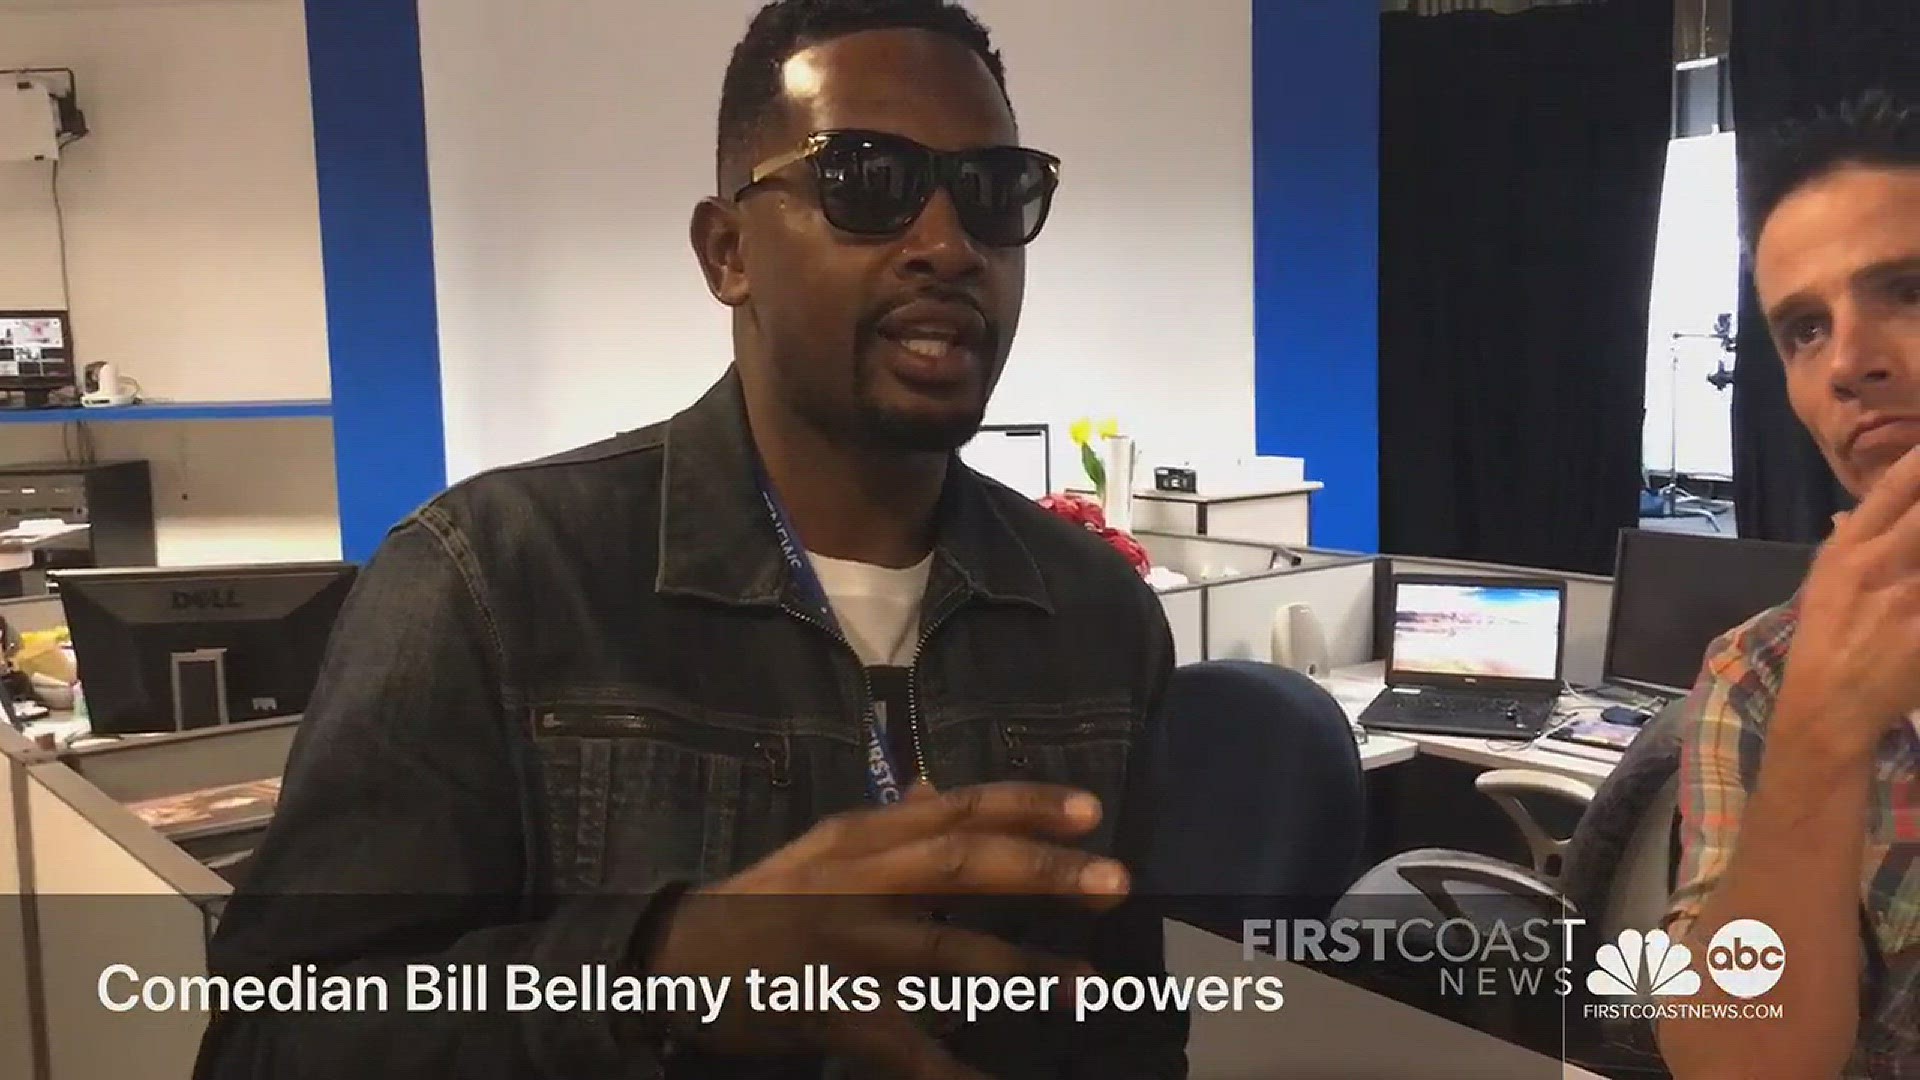 Comedian Bill Bellamy appeared on First Coast Living on Friday, but beforehand he hung out in the FCN newsroom sharing his excitement about Black Panther. FCL host Curtis Dvorak asked Bill what super powers would he want.